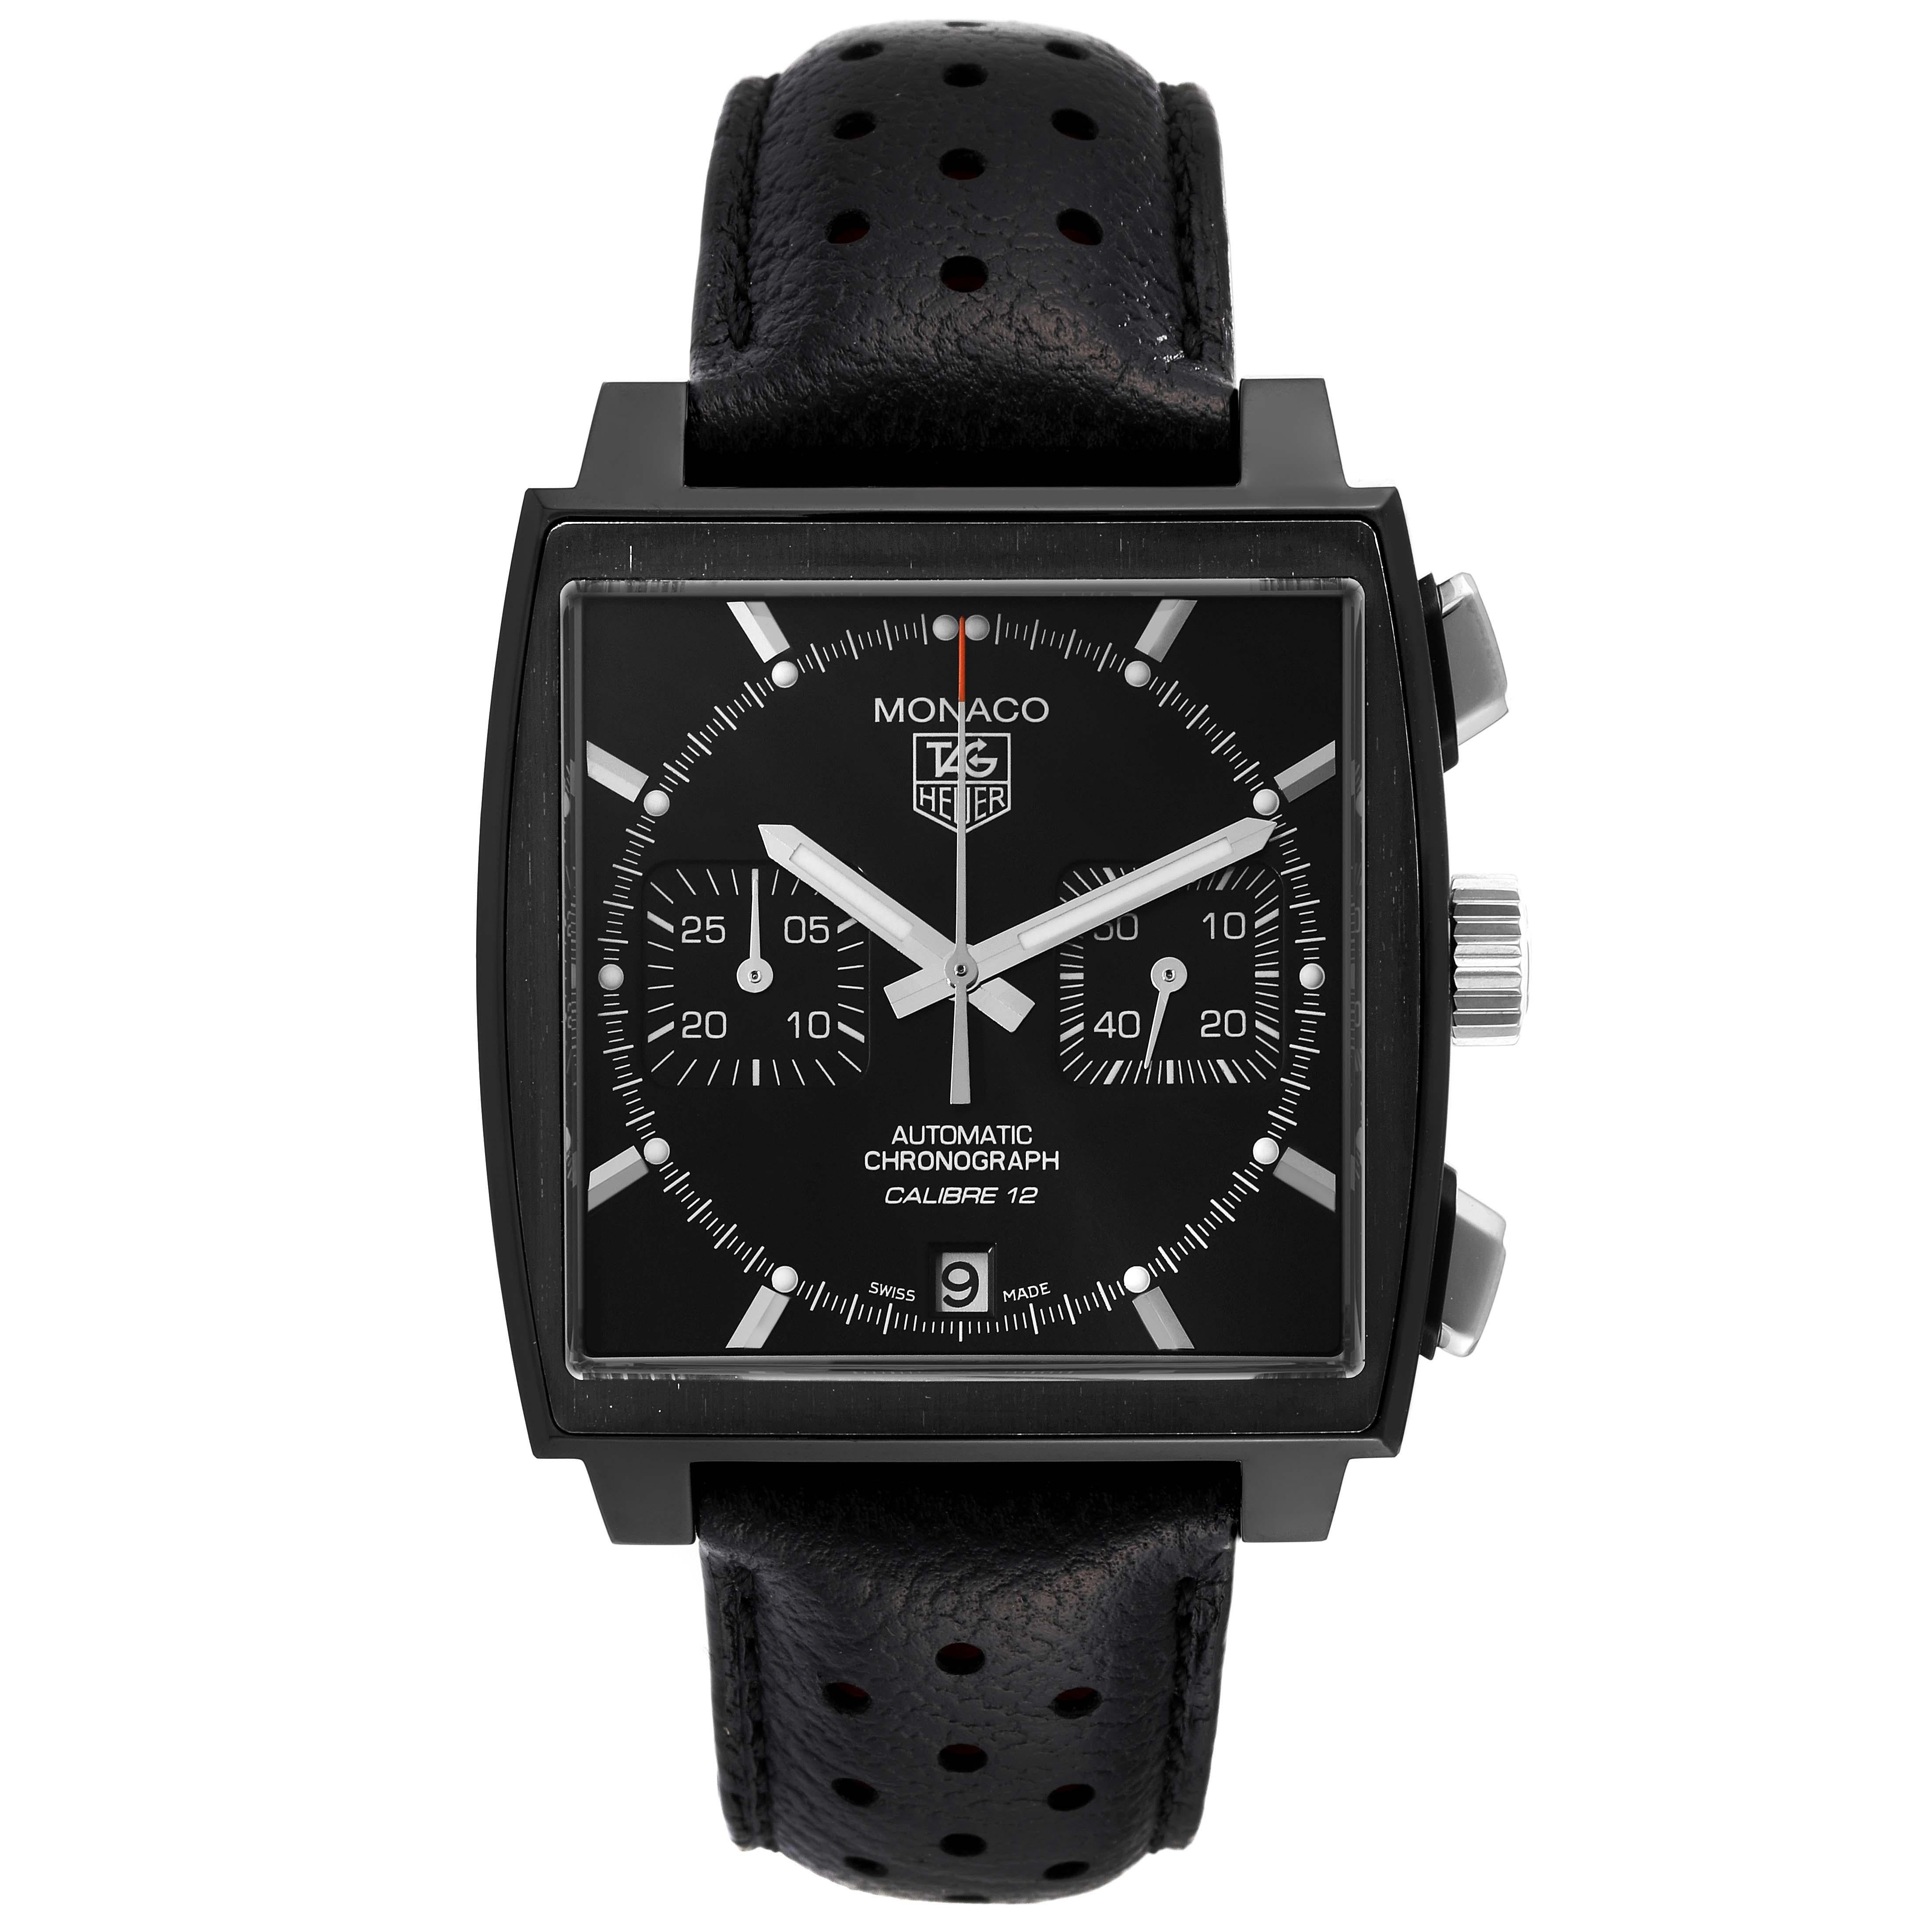 Tag Heuer Monaco LE Chronograph Steel Mens Watch CAW211M Box Card. Automatic self-winding movement. Calibre 12. Titanium carbide coated stainless steel case 40.5 x 40.5 mm. Transparent exhibition sapphire crystal back. Titanium carbide coated